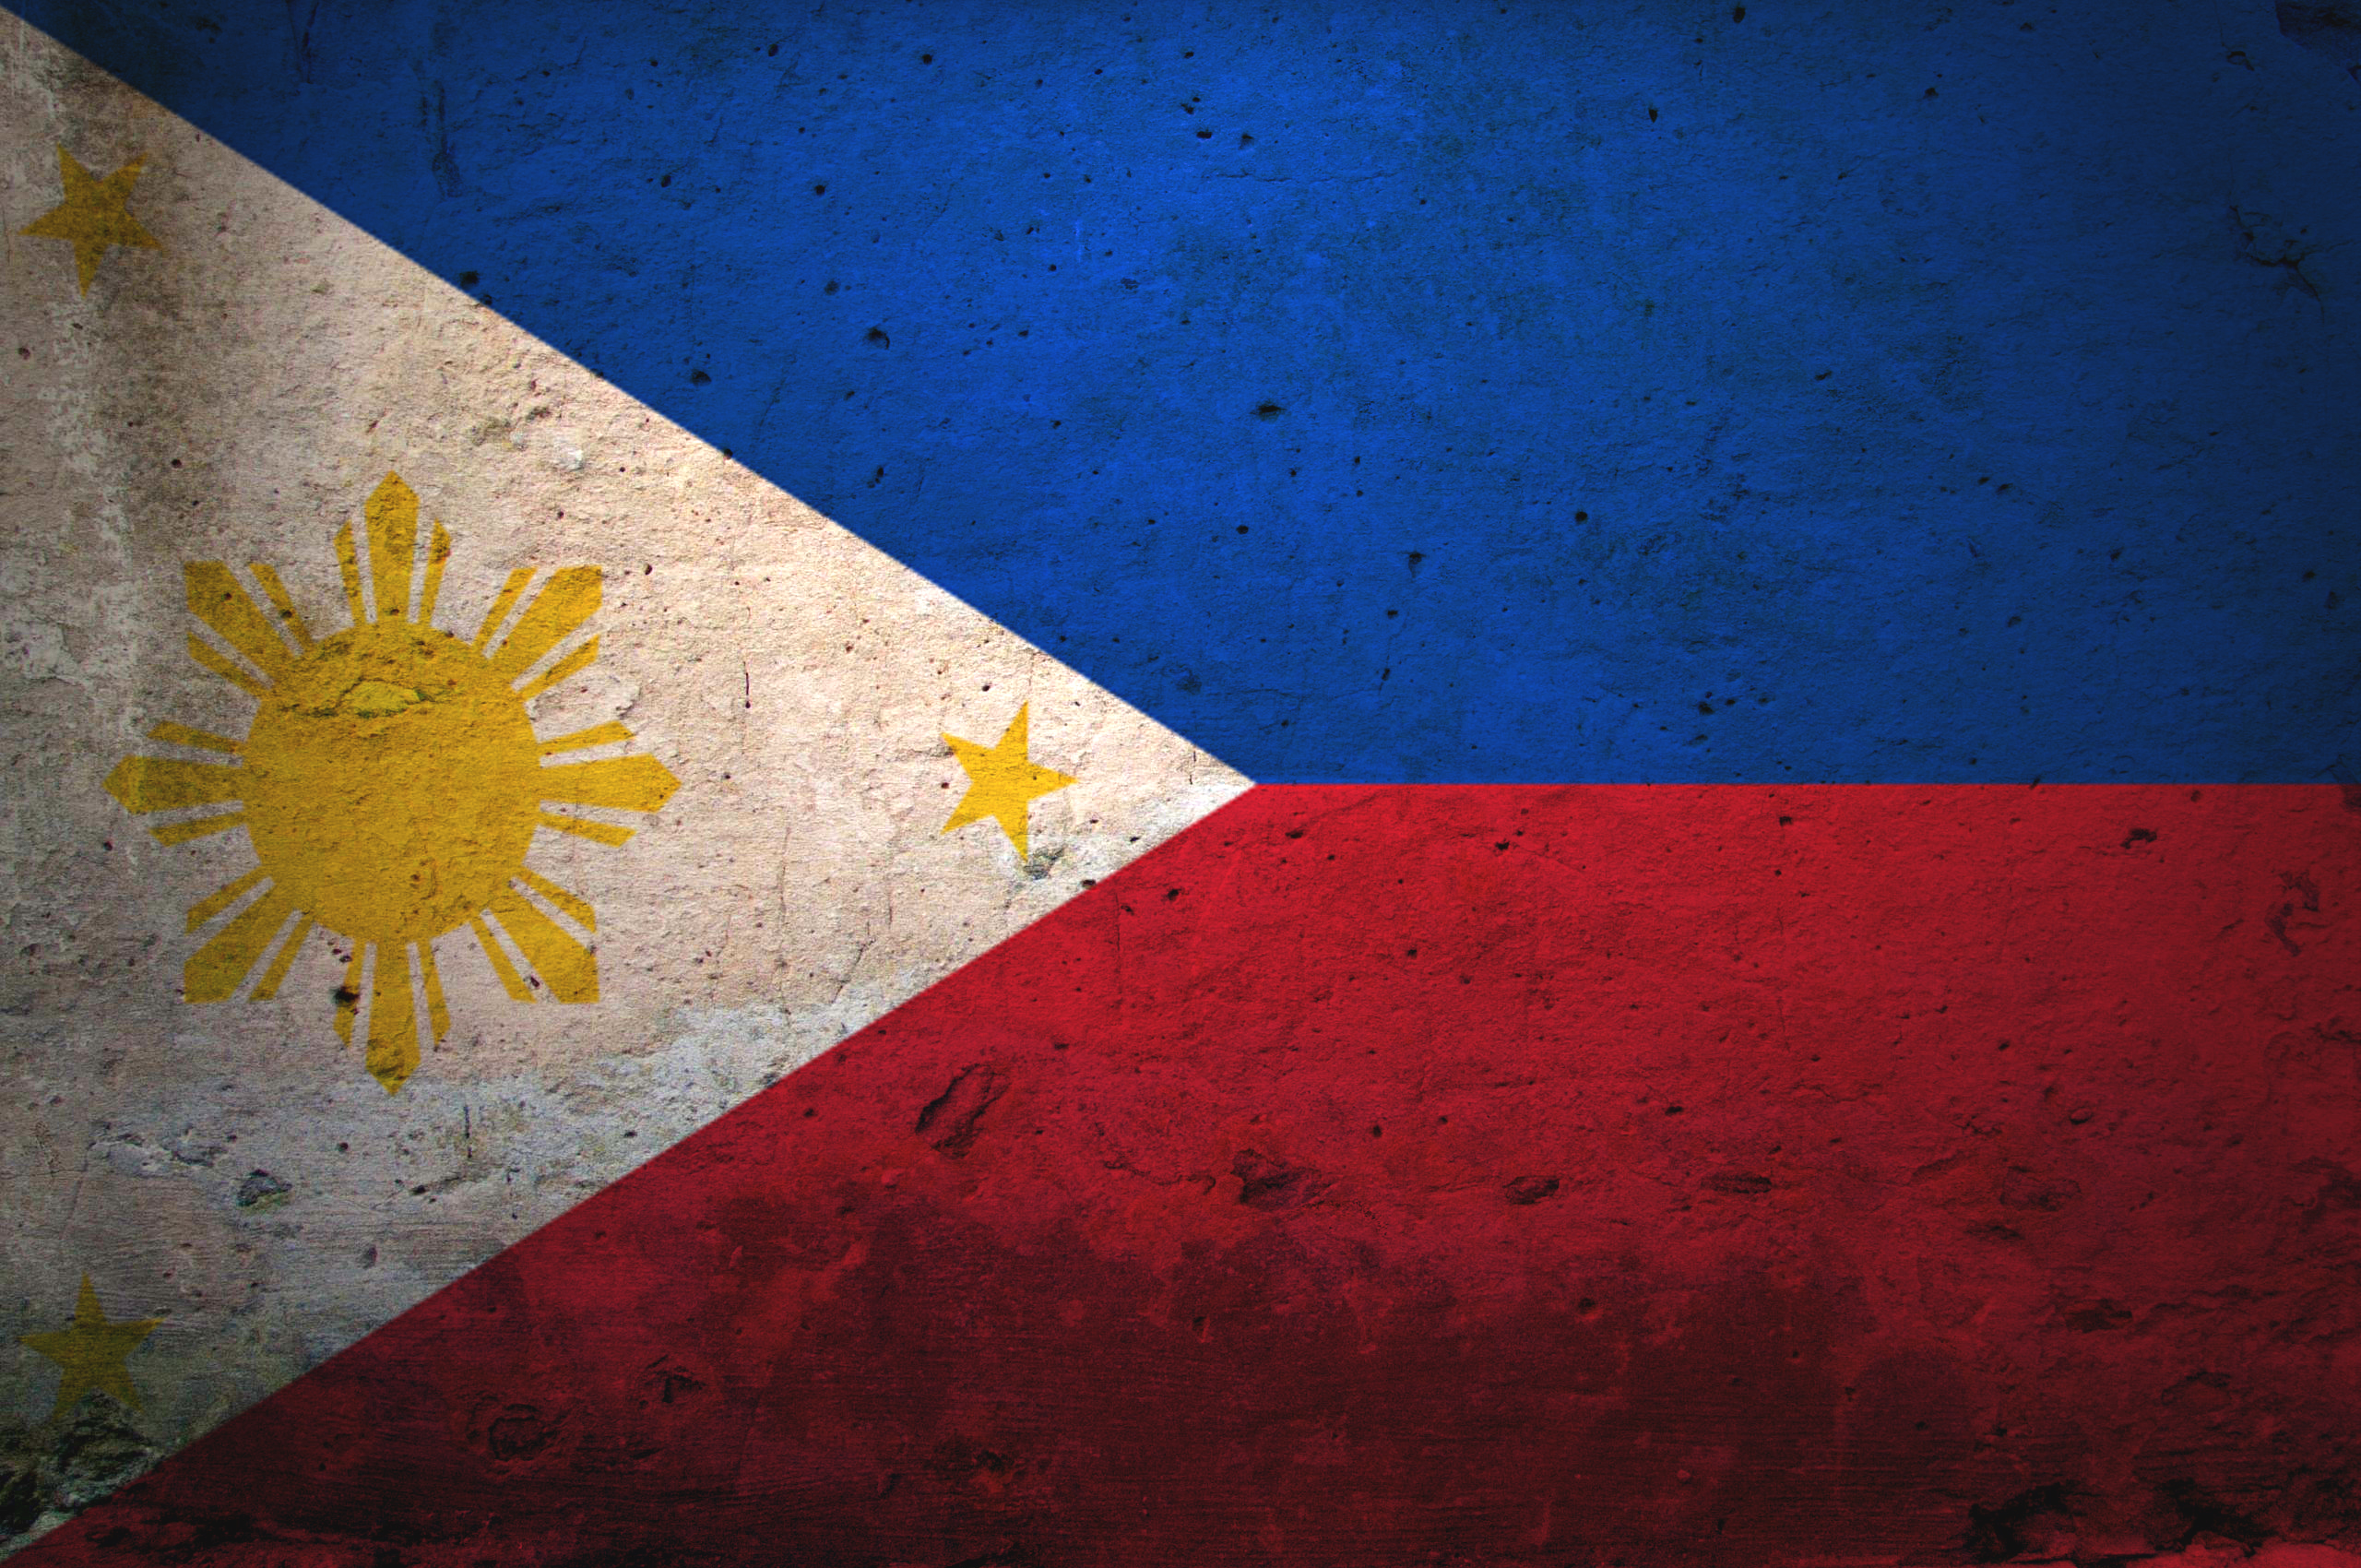 philippine flag wallpaper hd,flag,red,yellow,blue,sky